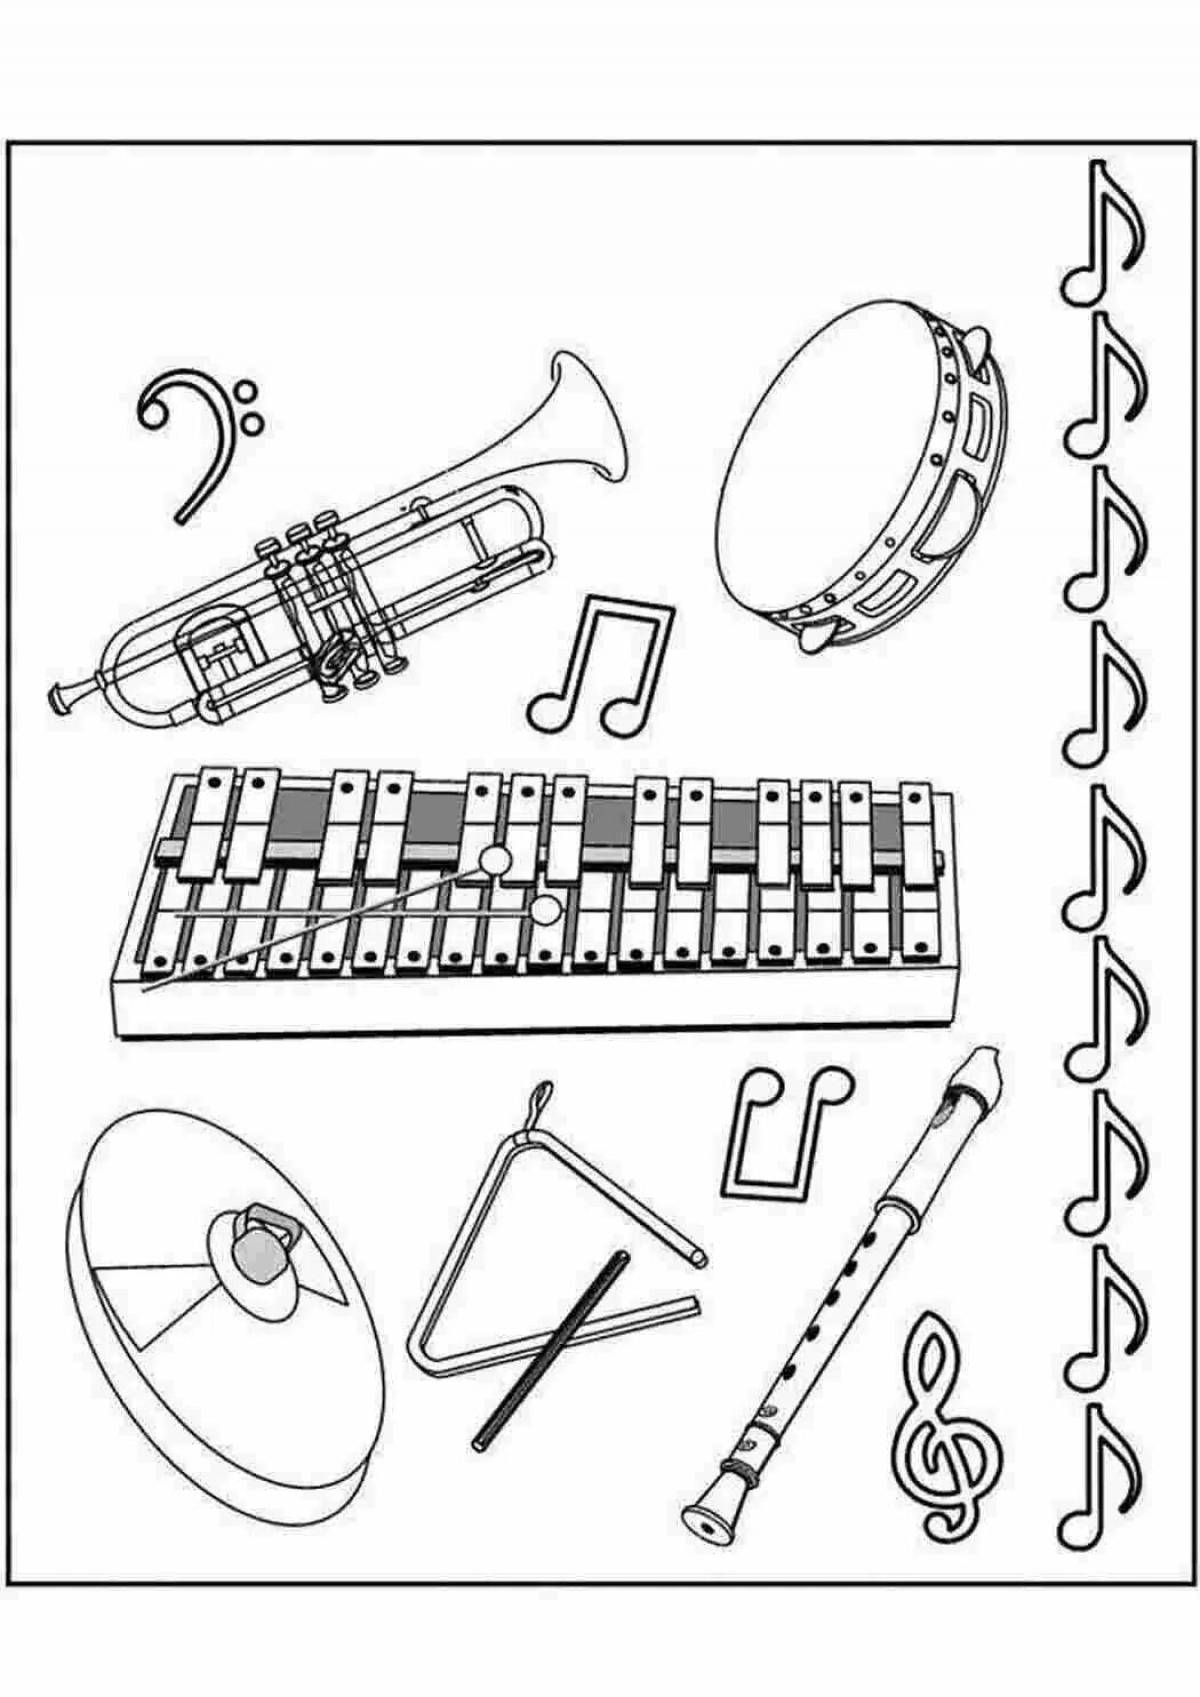 Exciting folk musical instruments coloring pages for kids